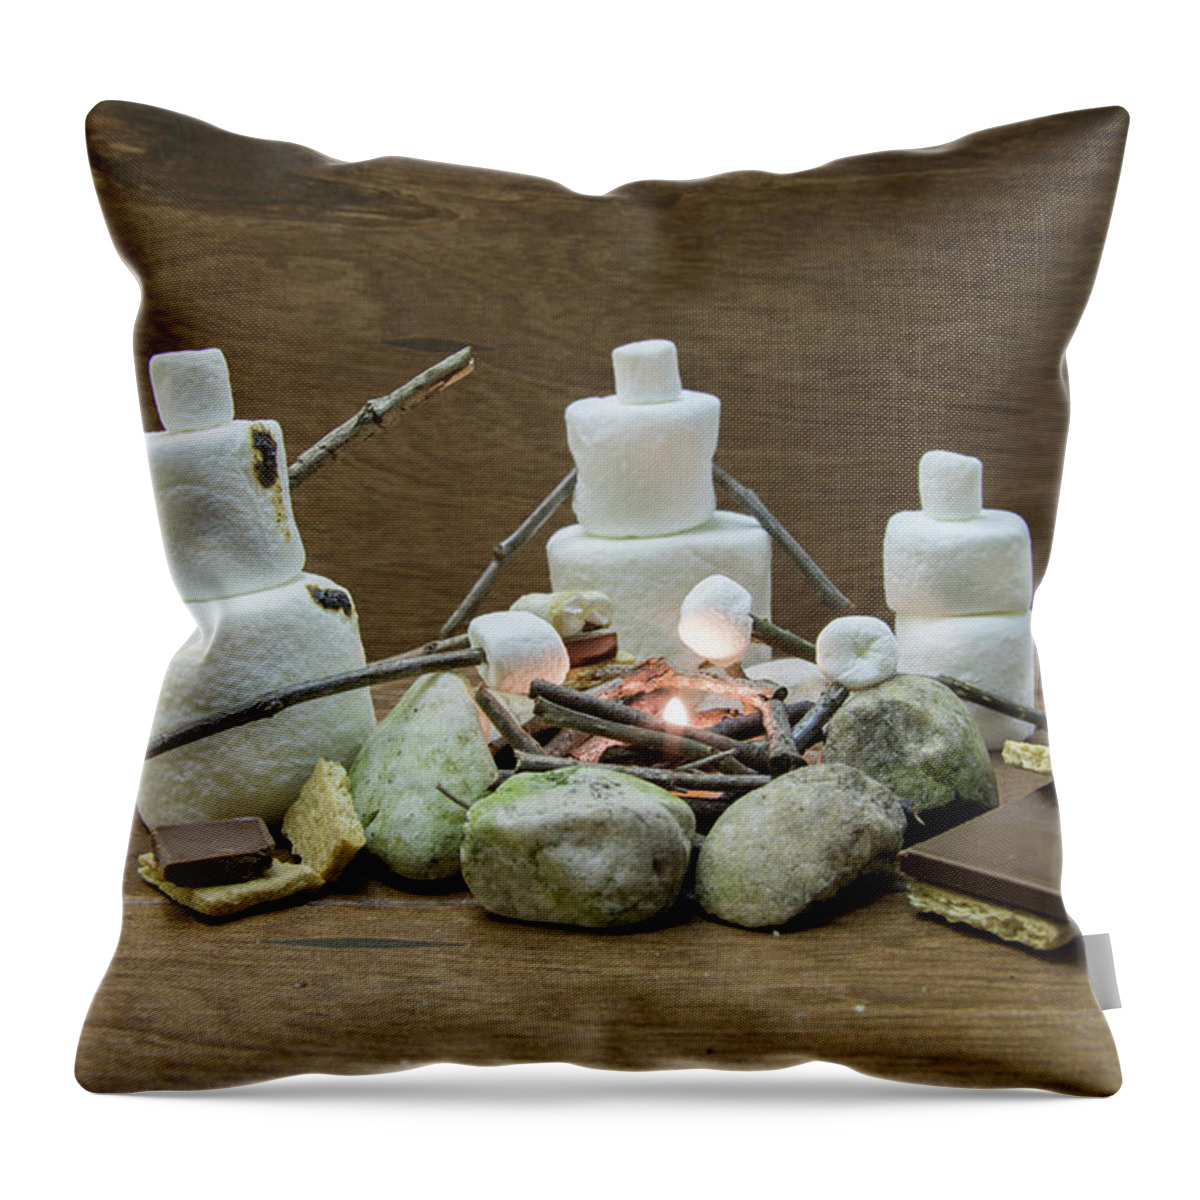 Bar Throw Pillow featuring the photograph Marshmallow family making s'mores over campfire by Karen Foley